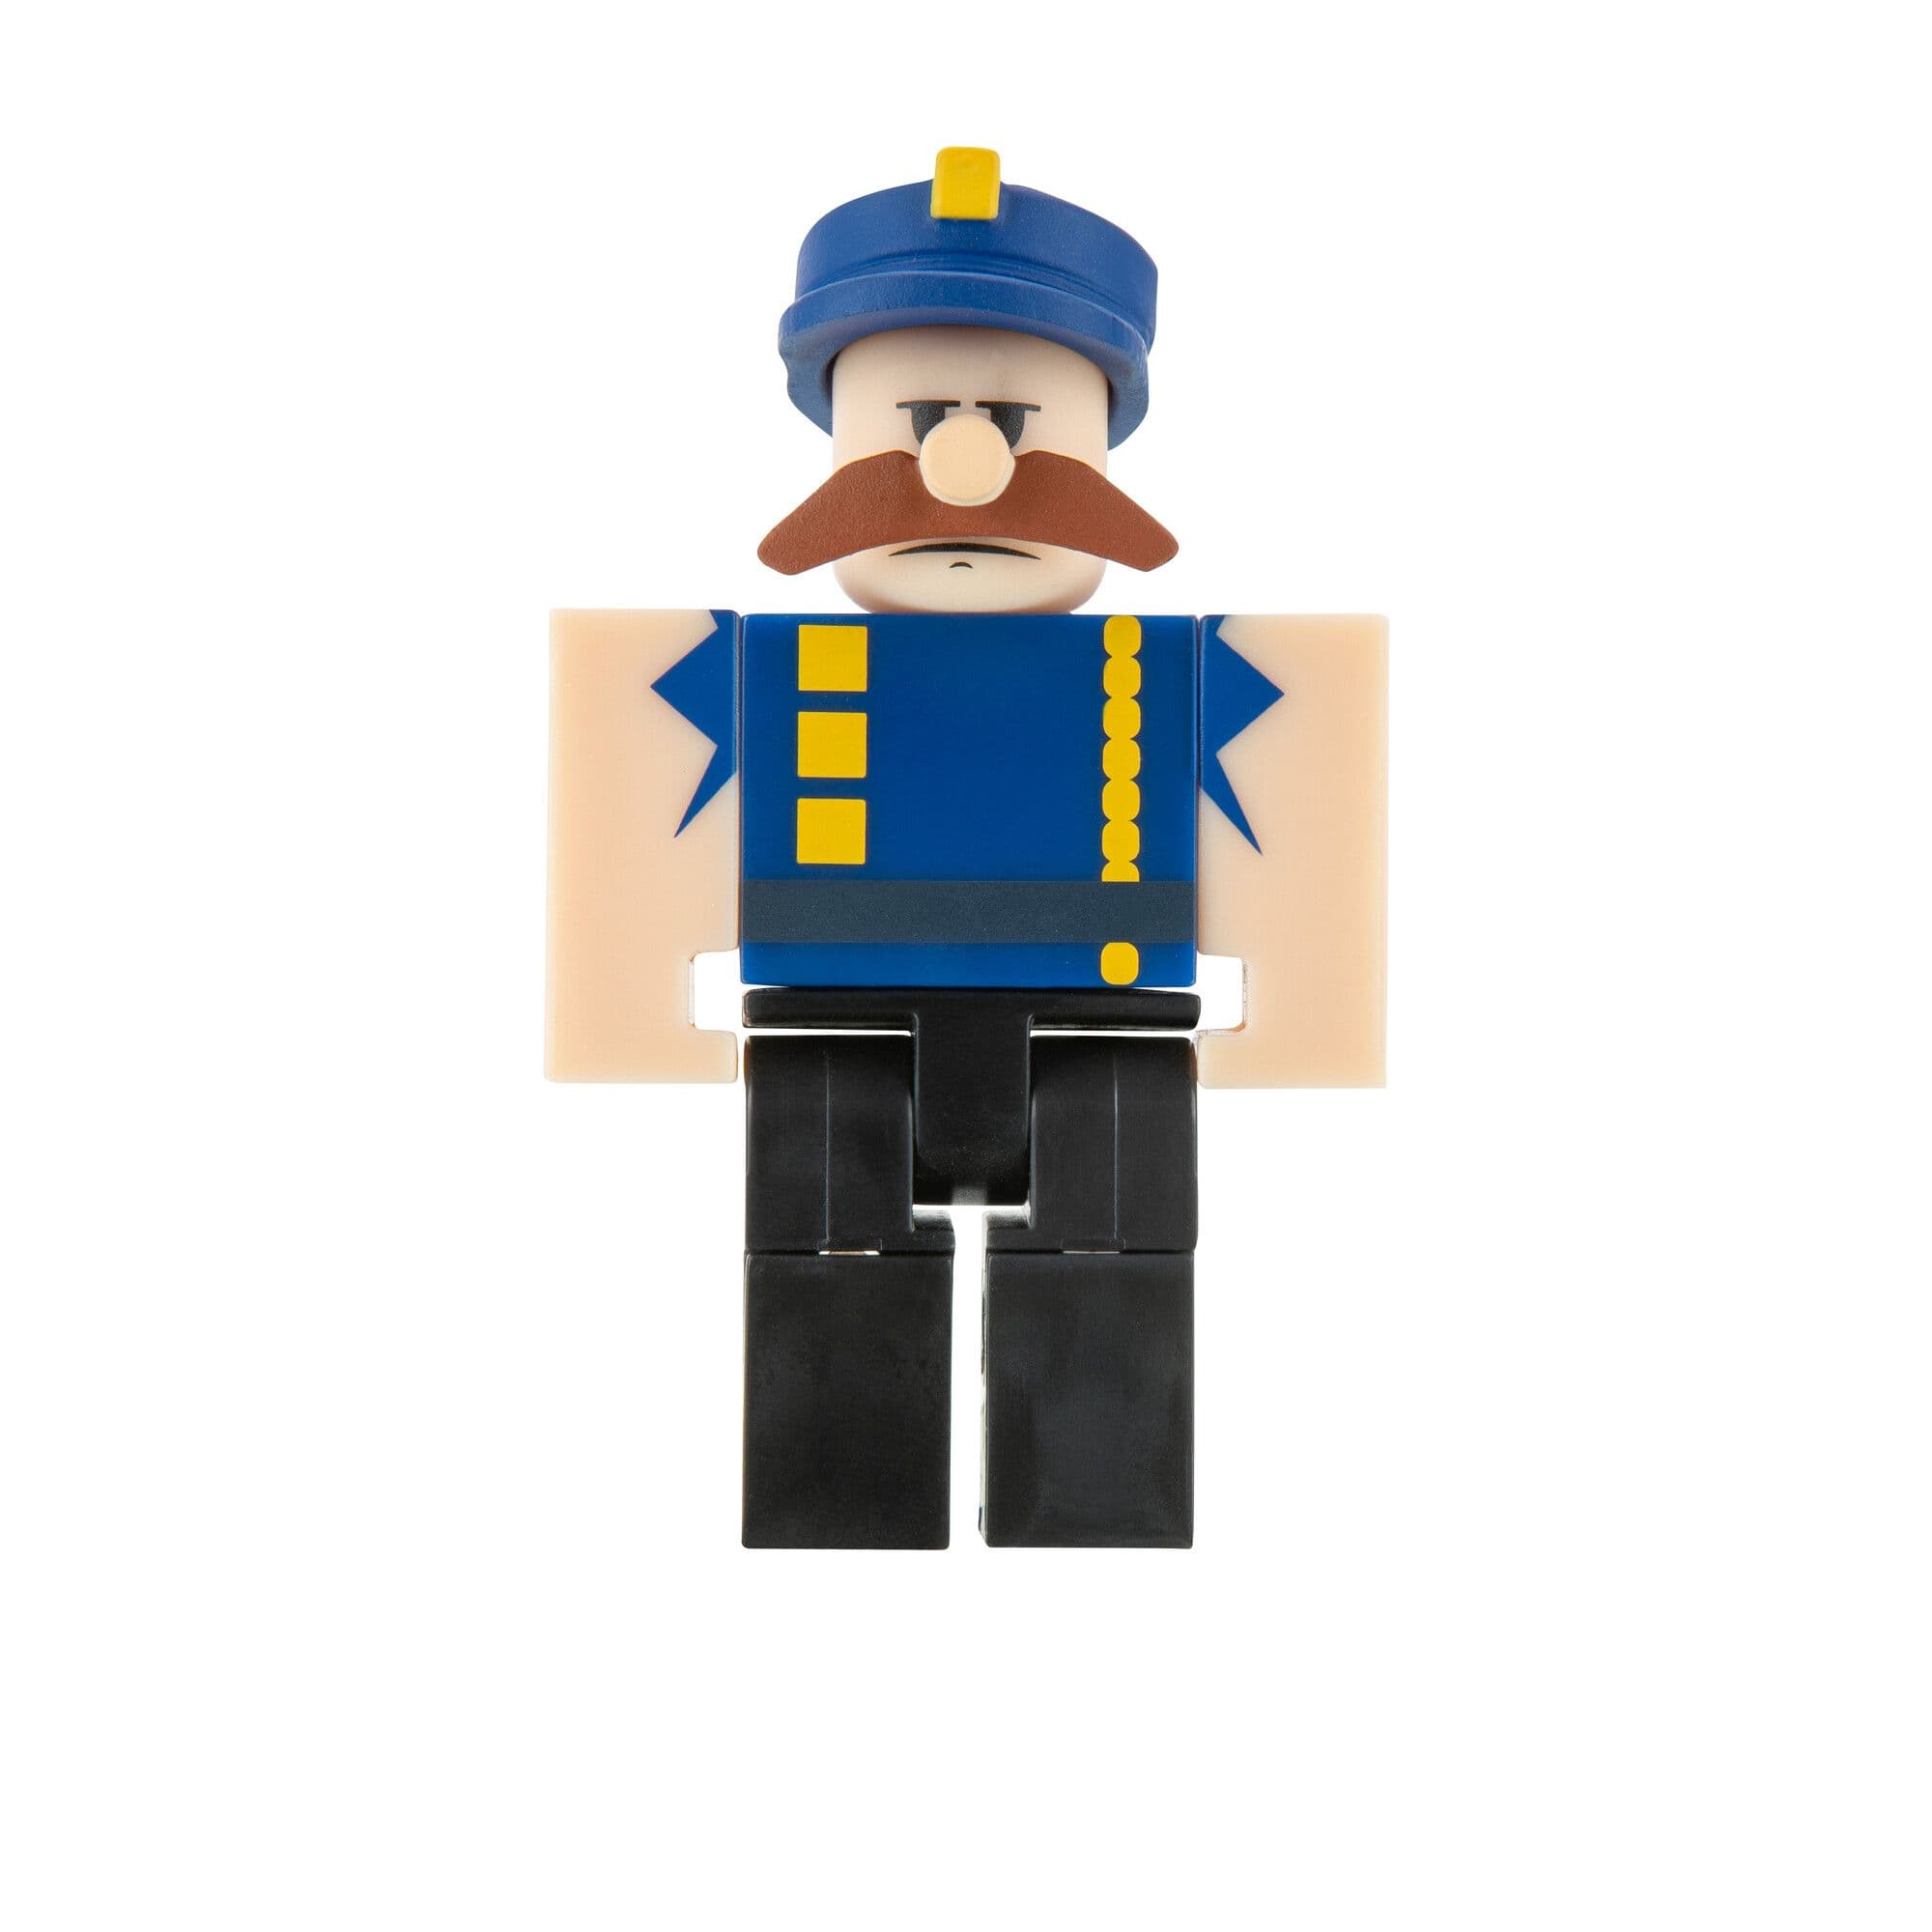  Roblox Deluxe Mystery Pack Action Figure Series 1 2